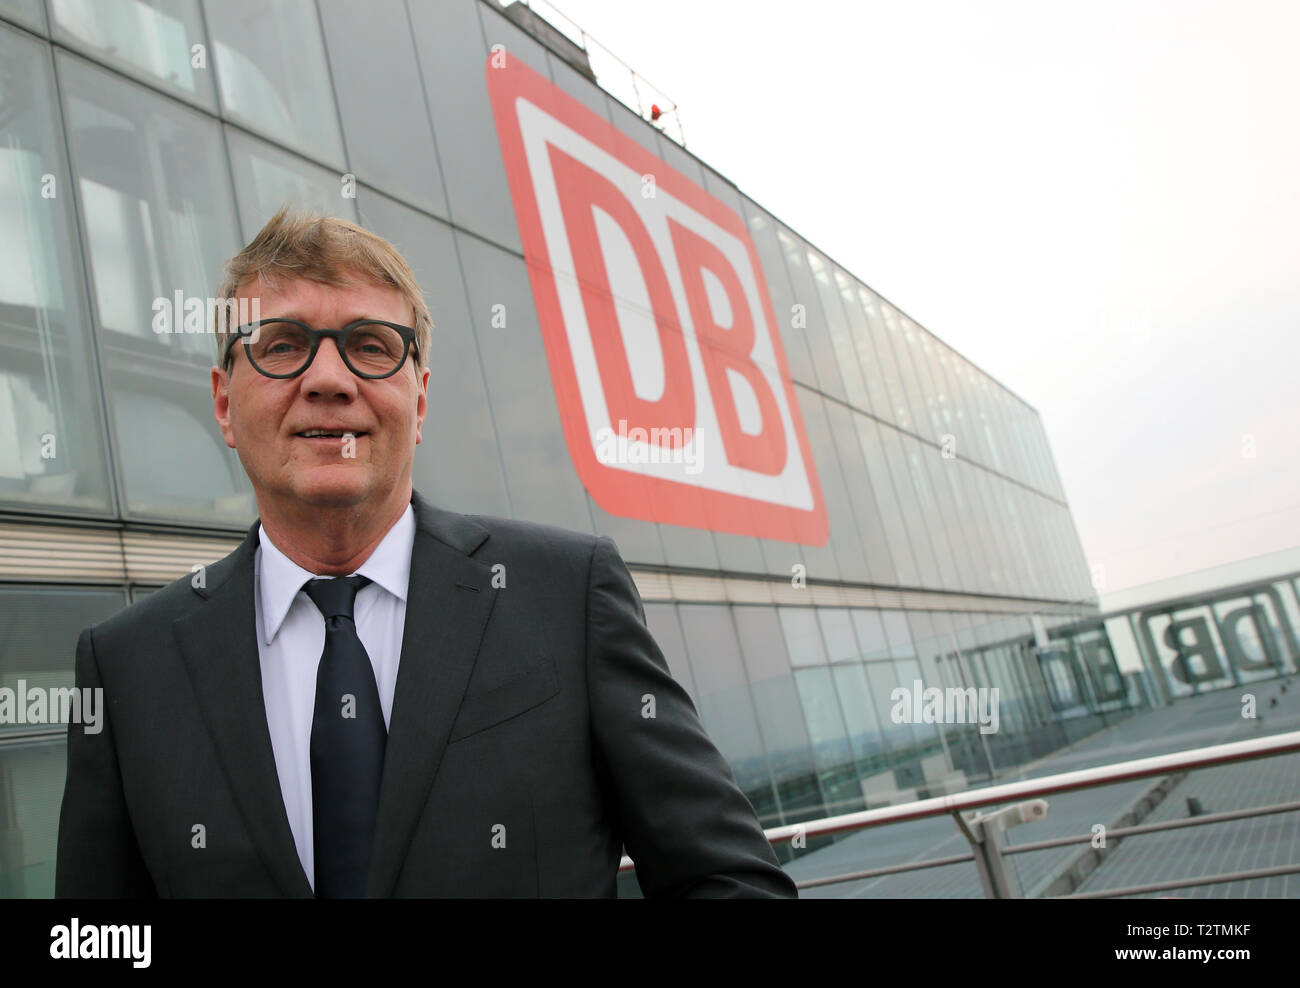 Berlin, Germany. 03rd Apr, 2019. Ronald Pofalla, Chief Infrastructure Officer of Deutsche Bahn, stands on the terrace of the Bahntower. Deutsche Bahn wants more money from the federal government to renew its rail network. According to current plans, the federal government intends to increase the funds for this from 3.5 billion euros at present to 4.5 billion euros per year. Credit: Wolfgang Kumm/dpa/Alamy Live News Stock Photo